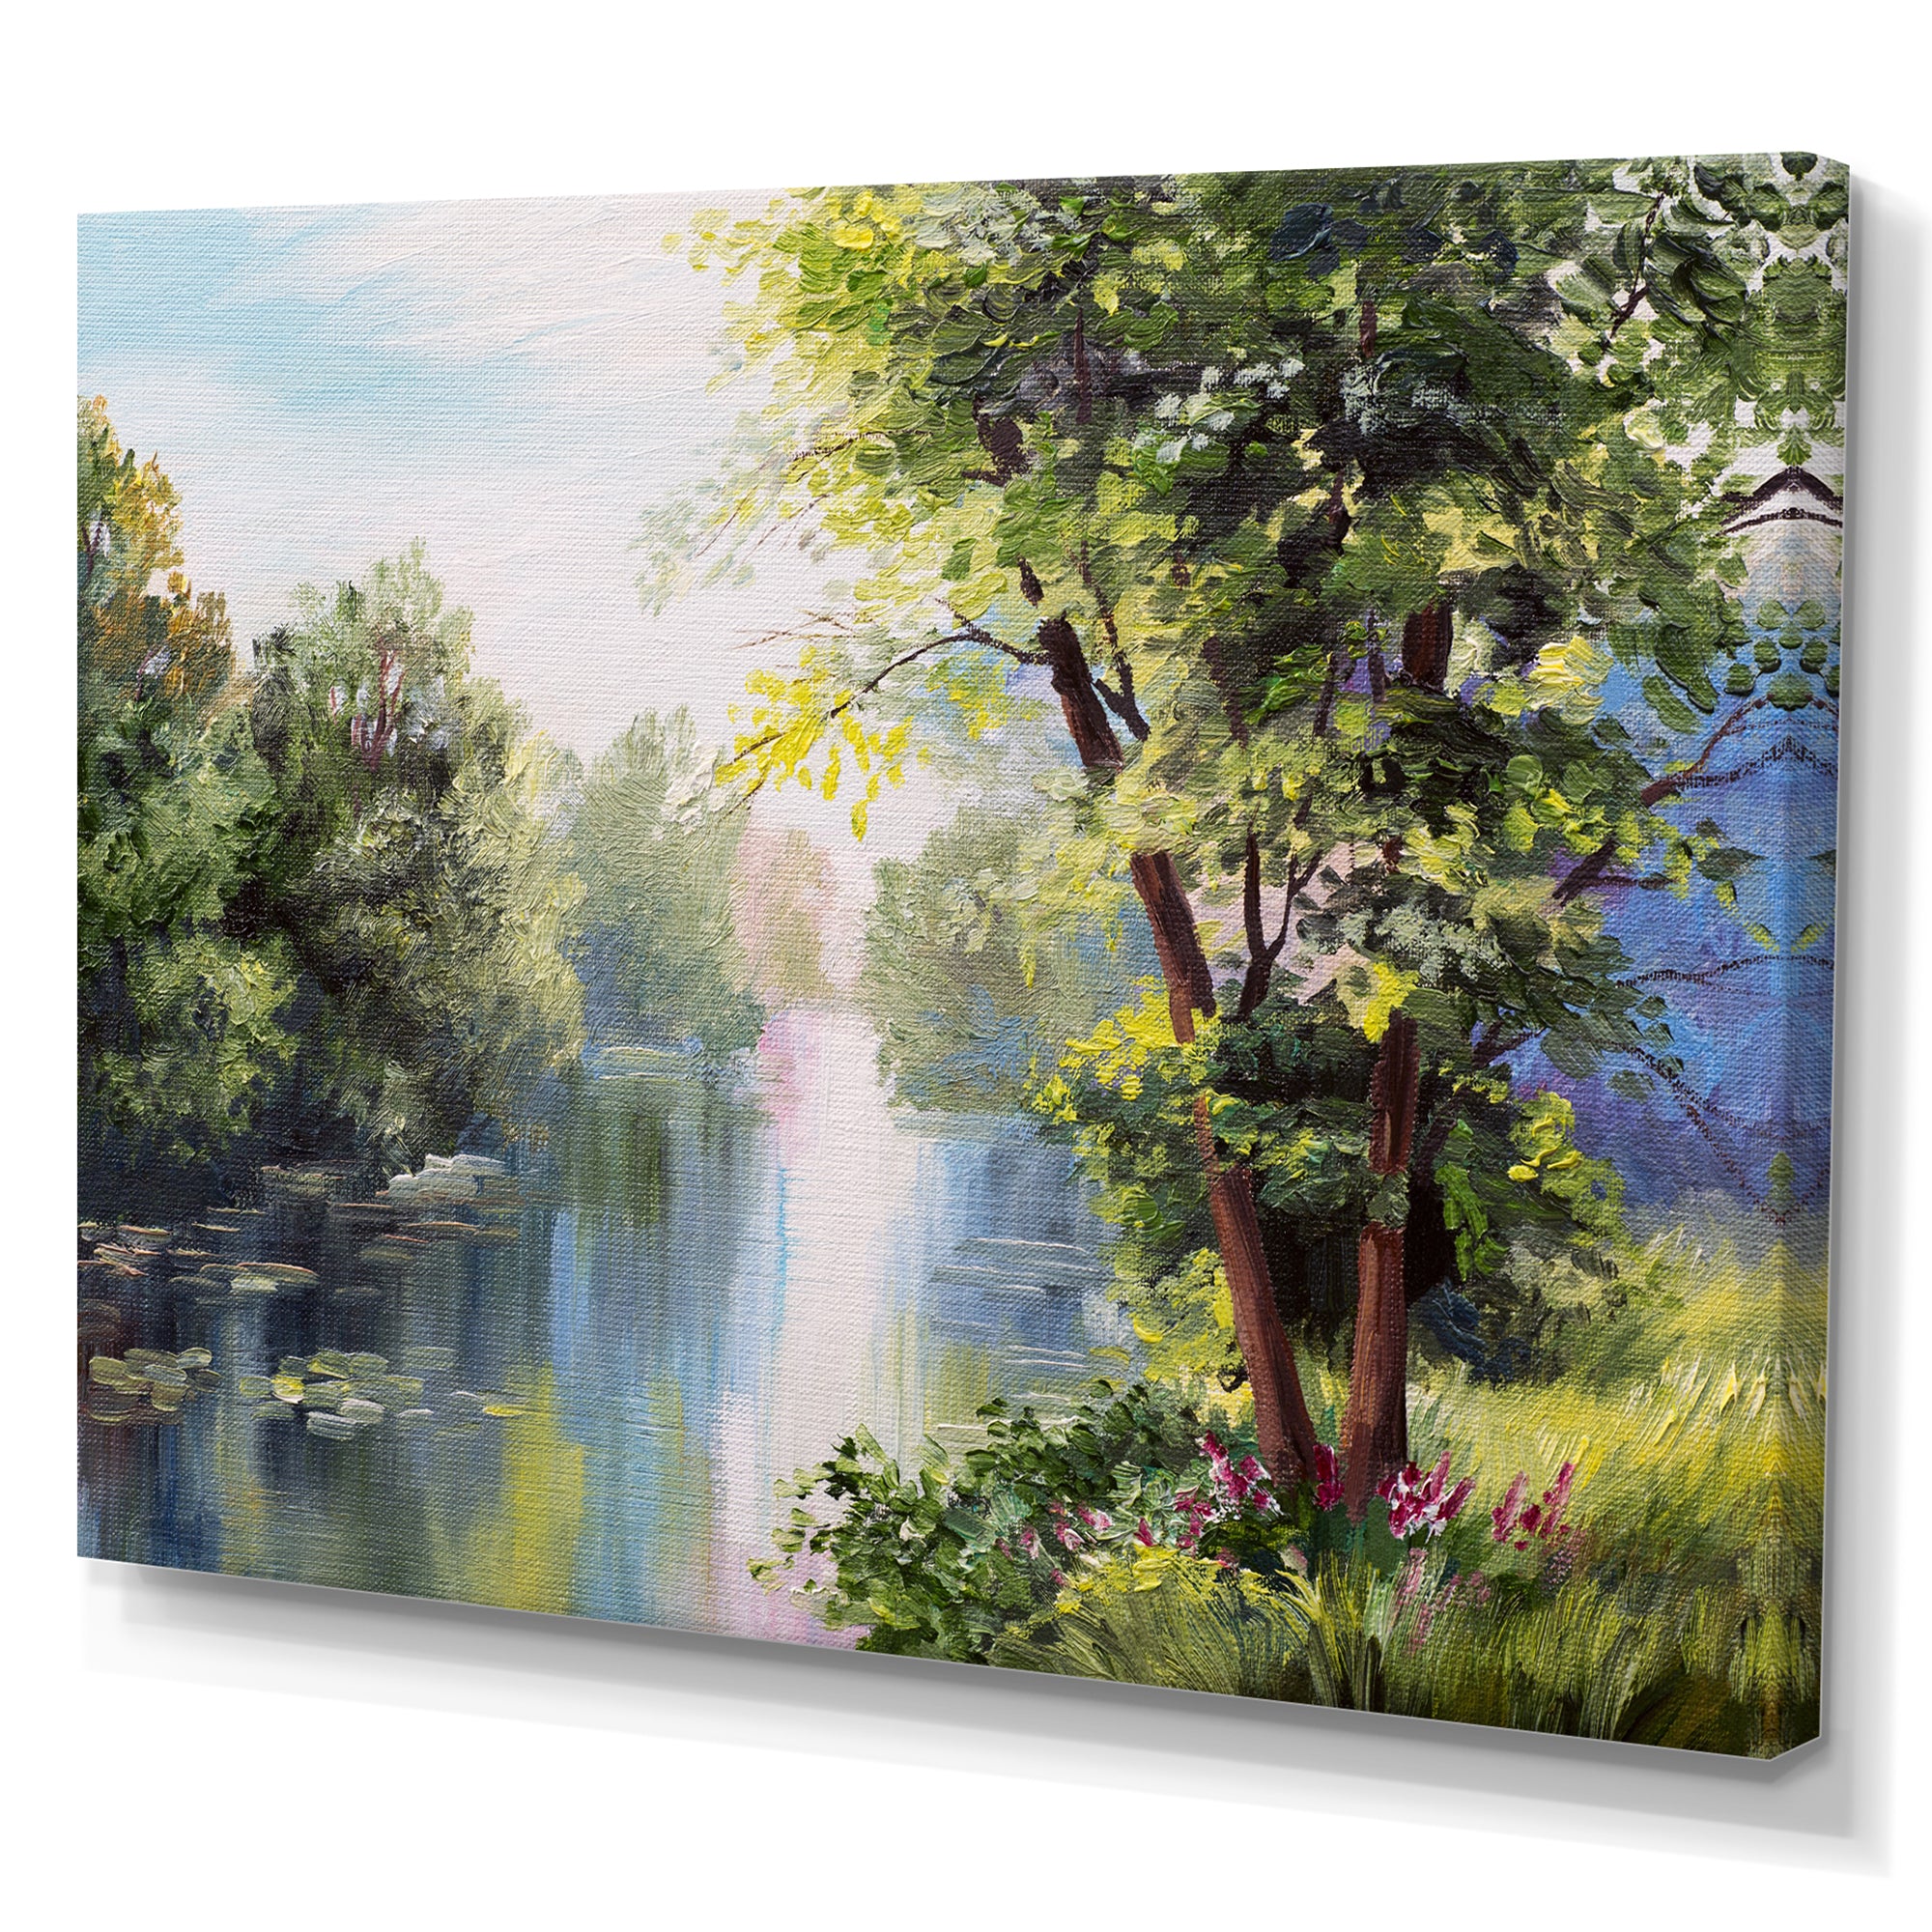 Landscape - Lake In The Forest Summer Day